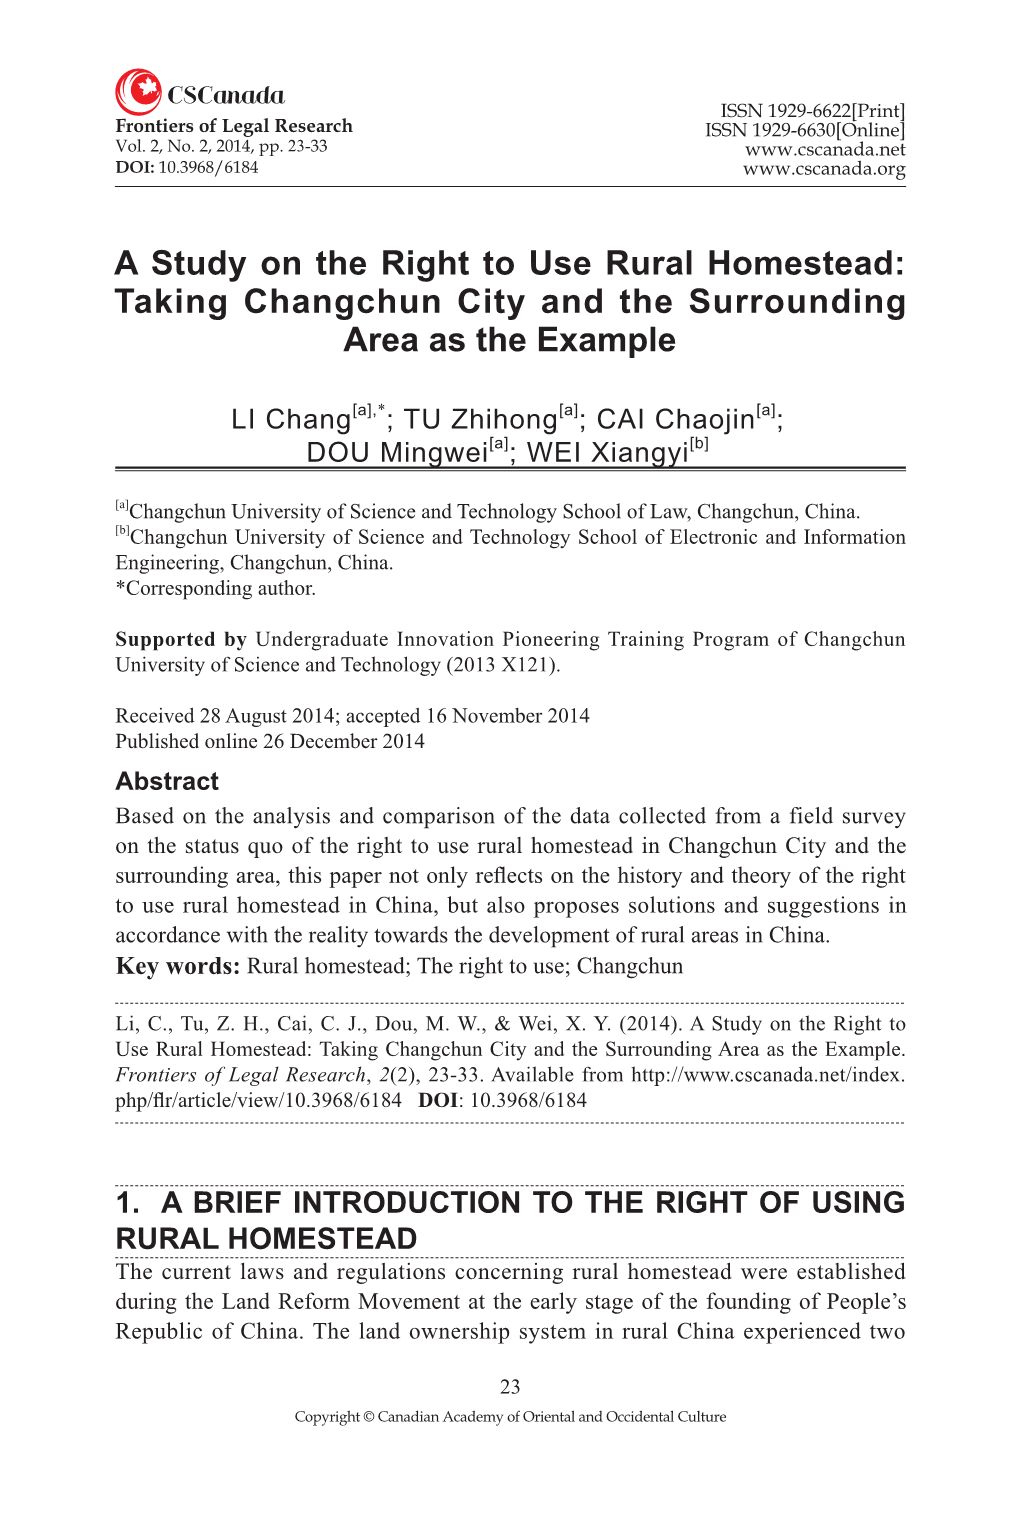 A Study on the Right to Use Rural Homestead: Taking Changchun City and the Surrounding Area As the Example